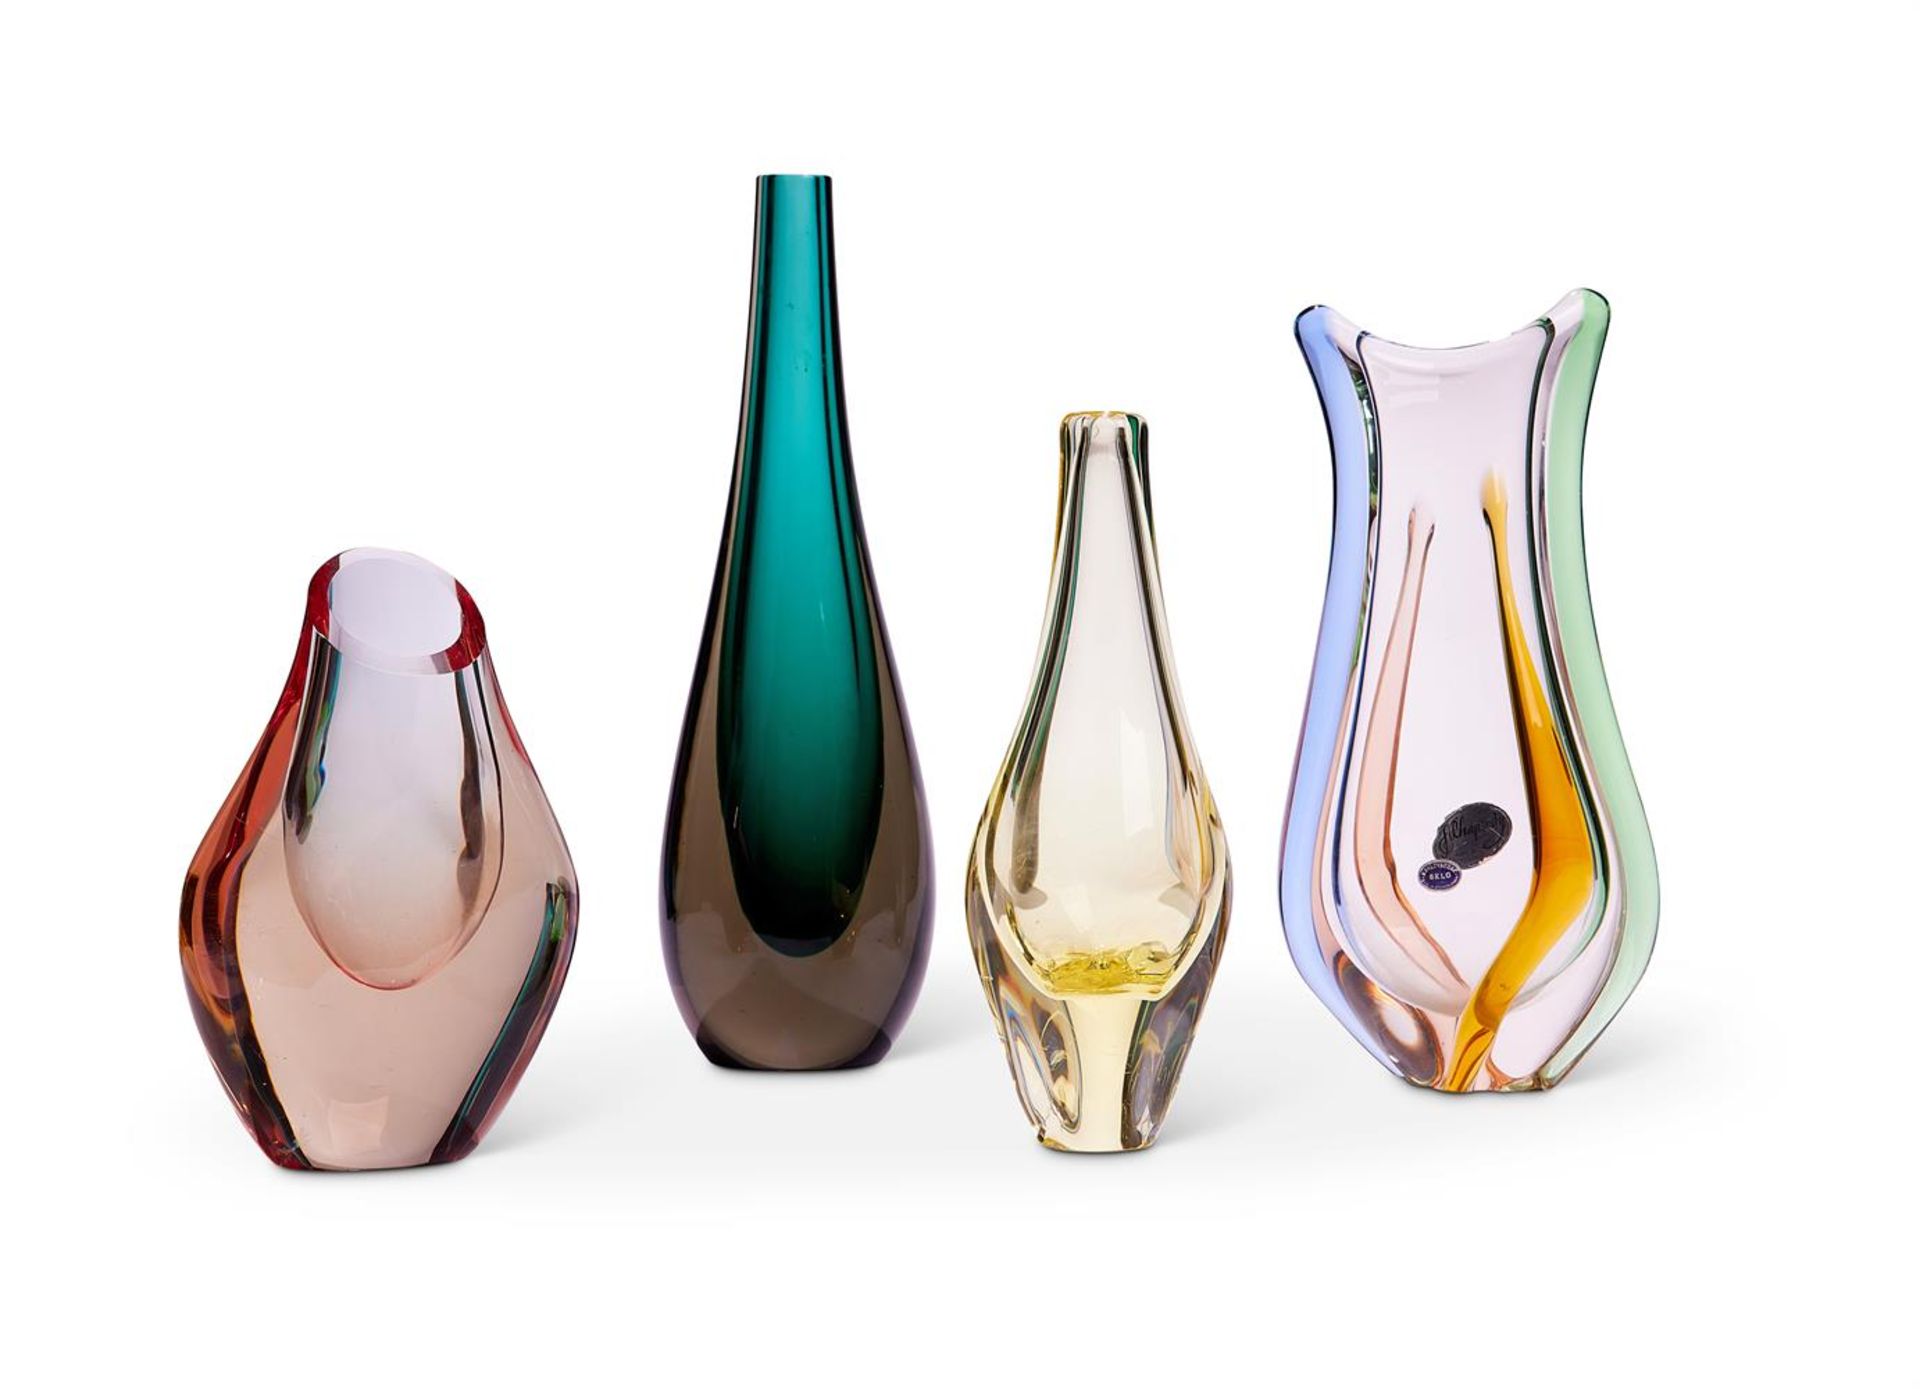 A GROUP OF FOUR HEAVY ART GLASS VASES, 20TH CENTURY